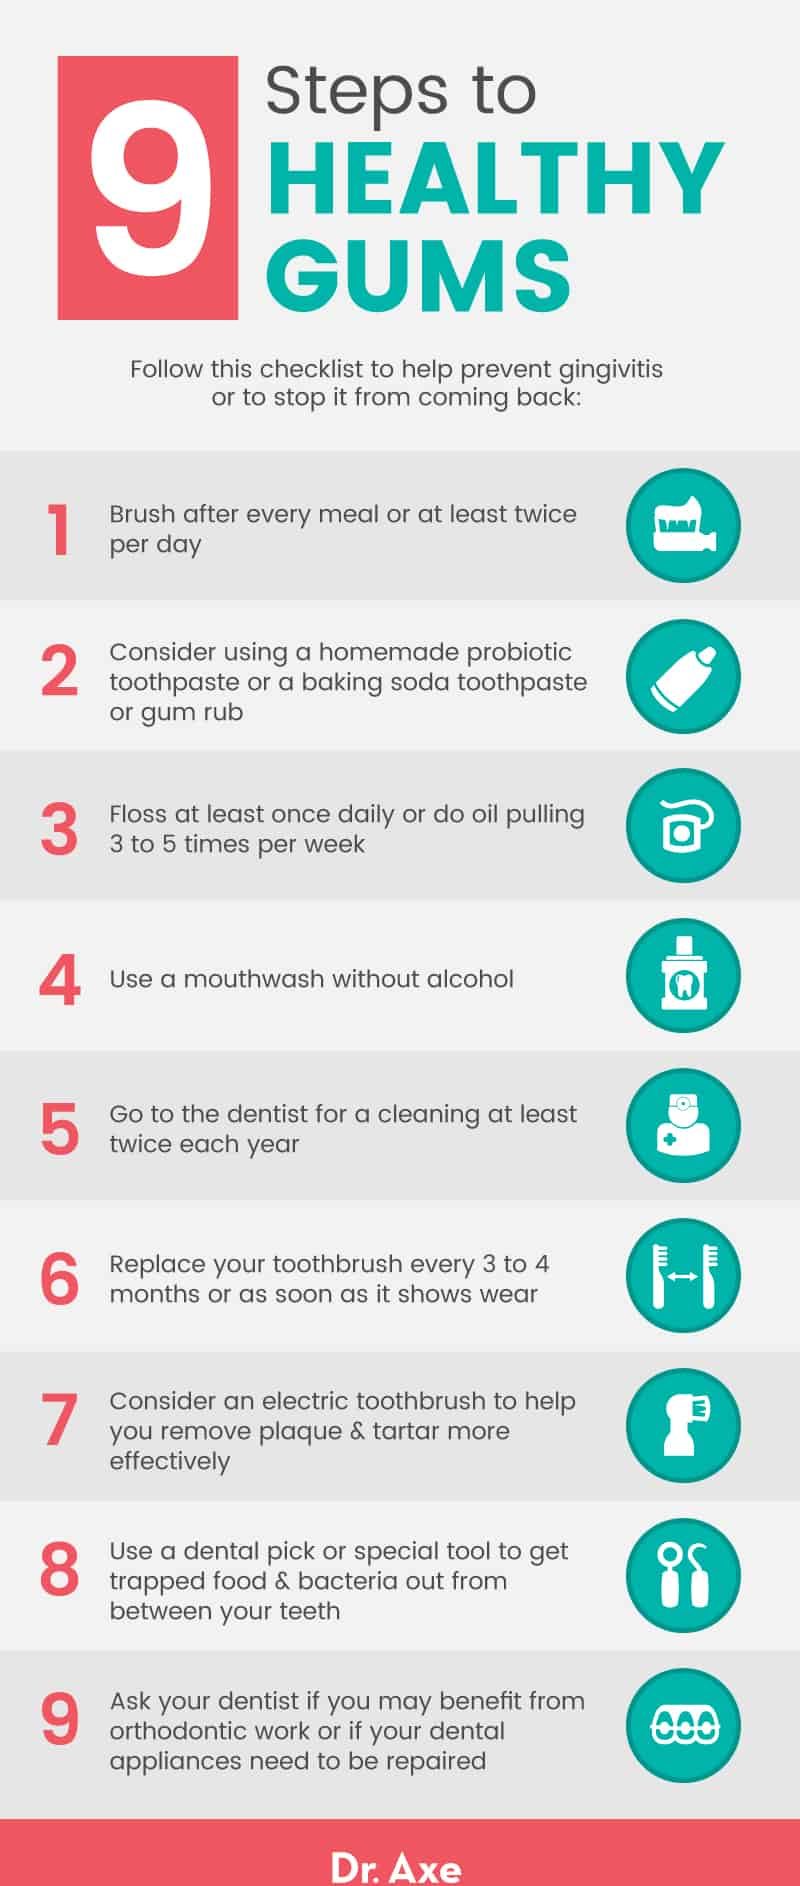 Gingivitis: 9 steps to healthy gums - Dr. Axe